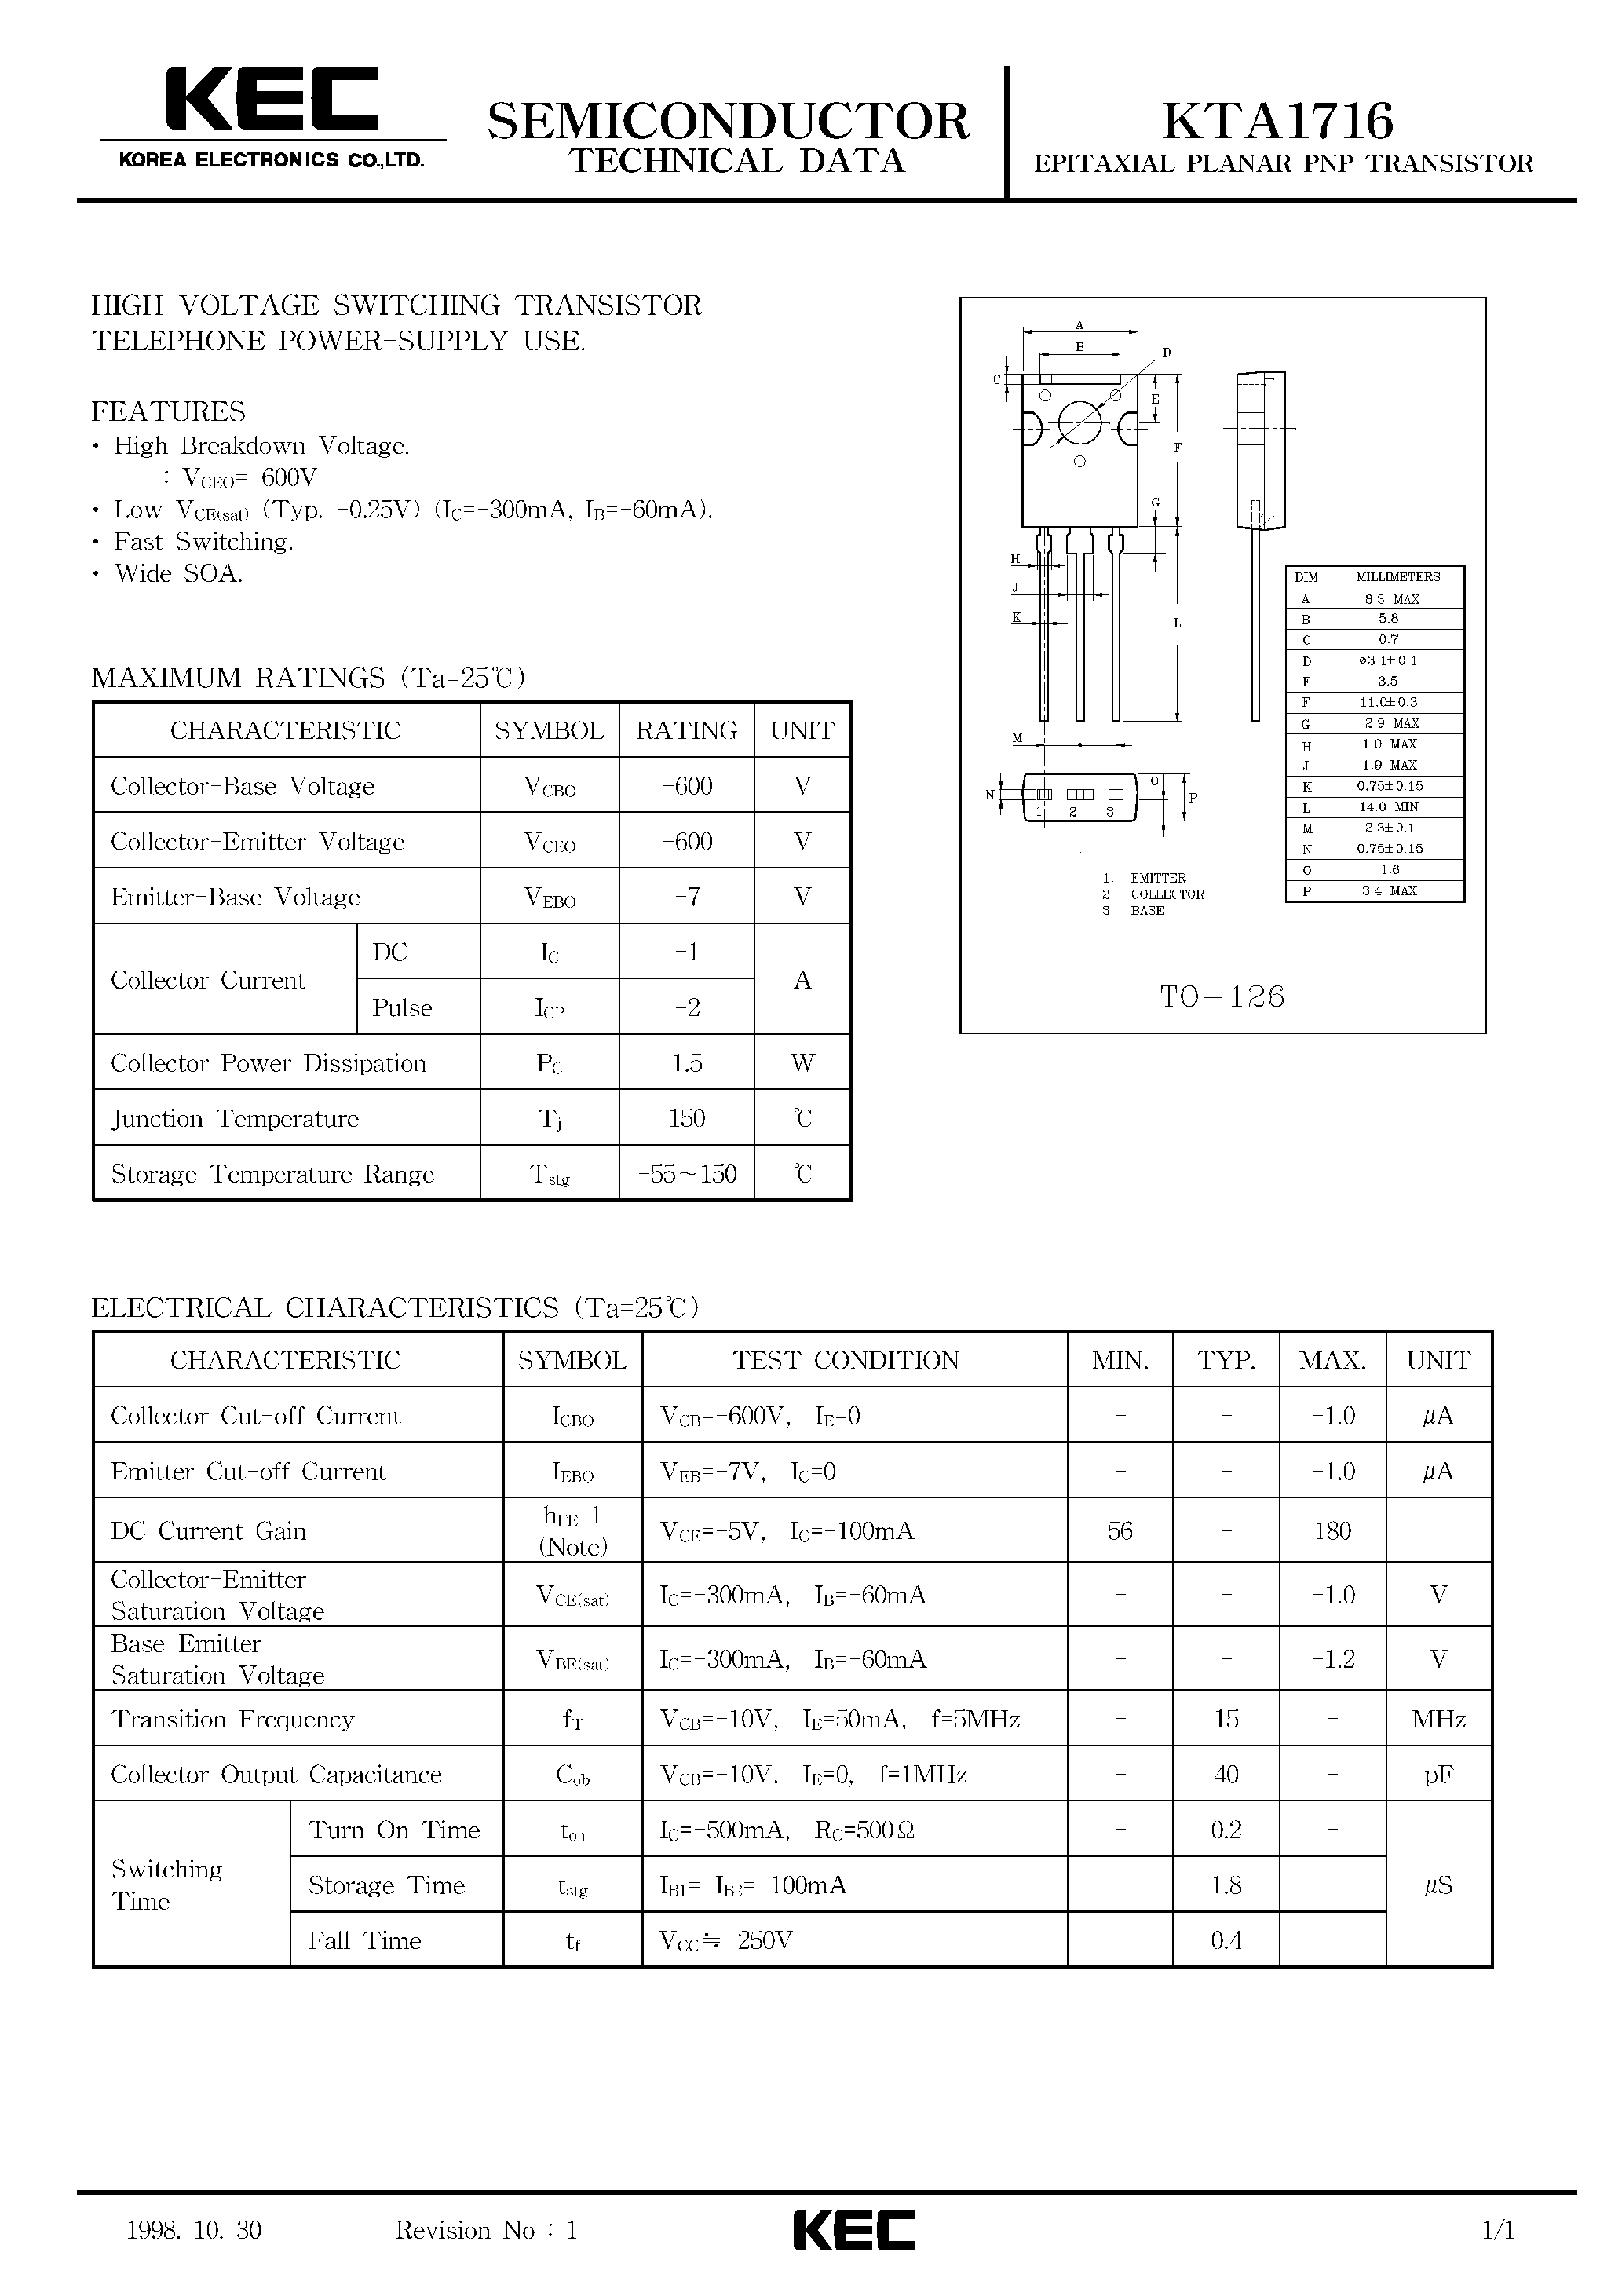 Datasheet KTA1716 - EPITAXIAL PLANAR PNP TRANSISTOR (HIGH VOLTAGE/ TELEPHONE POWER-SUPPLY USE) page 1